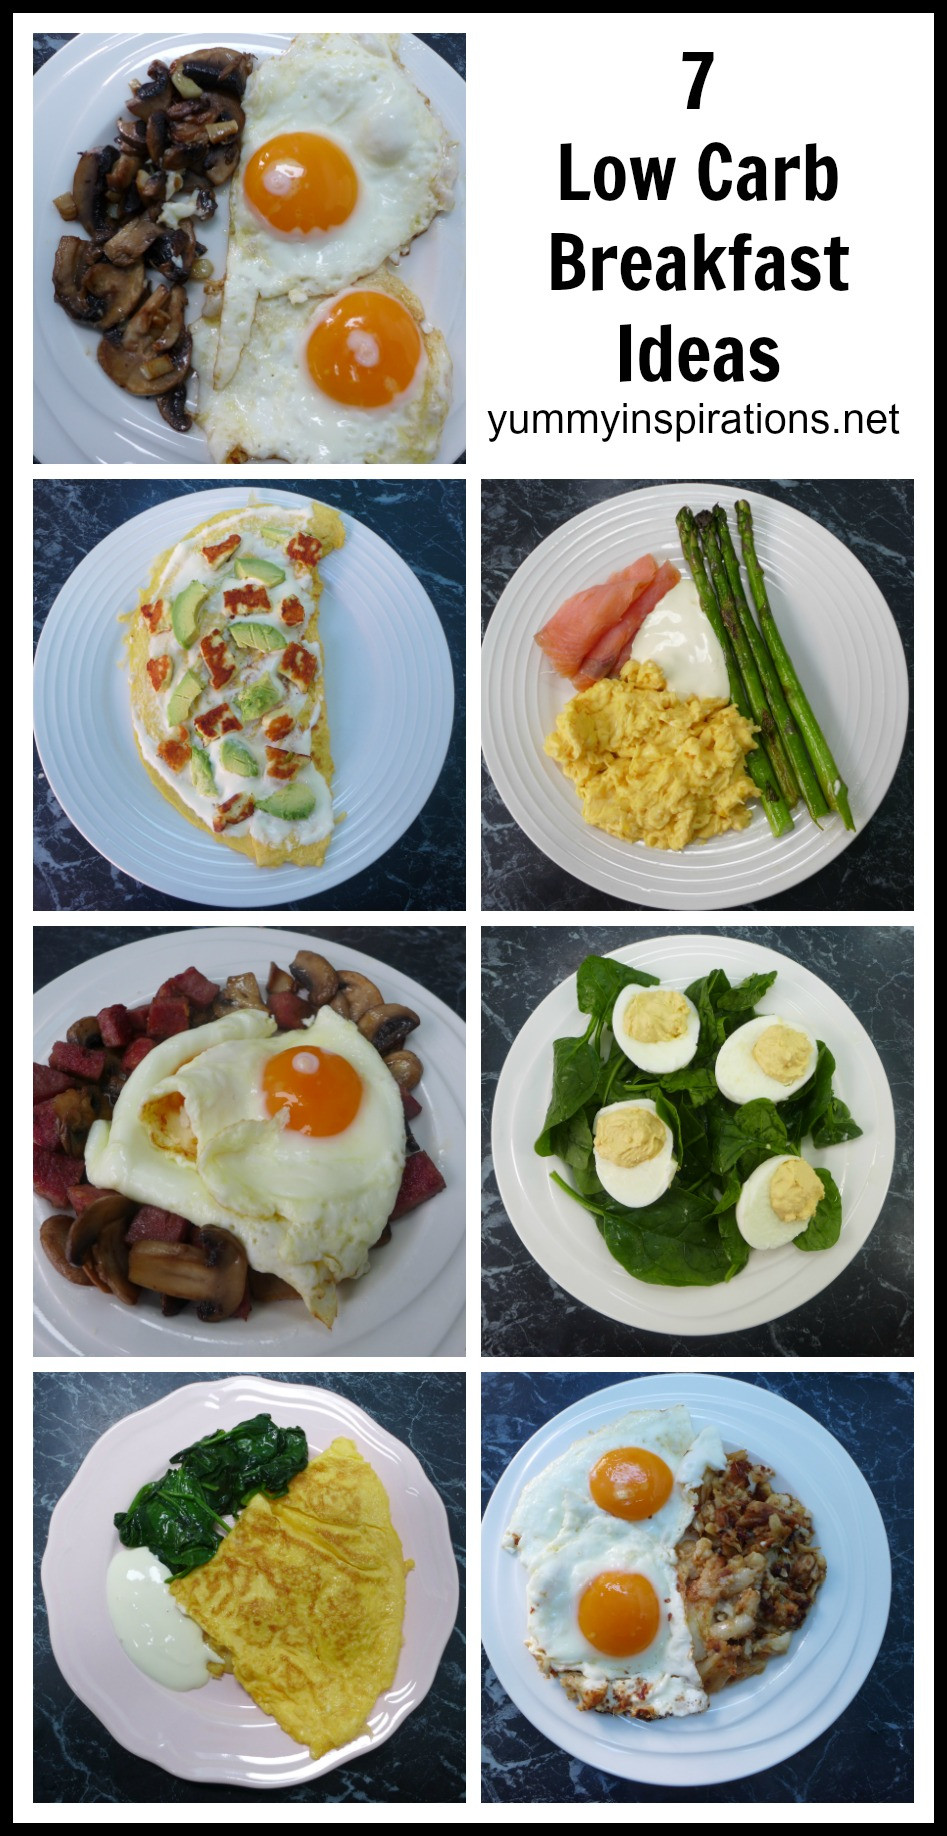 Low Carb Keto Recipes Breakfast
 7 Low Carb Breakfast Ideas A week of Keto Breakfast Recipes